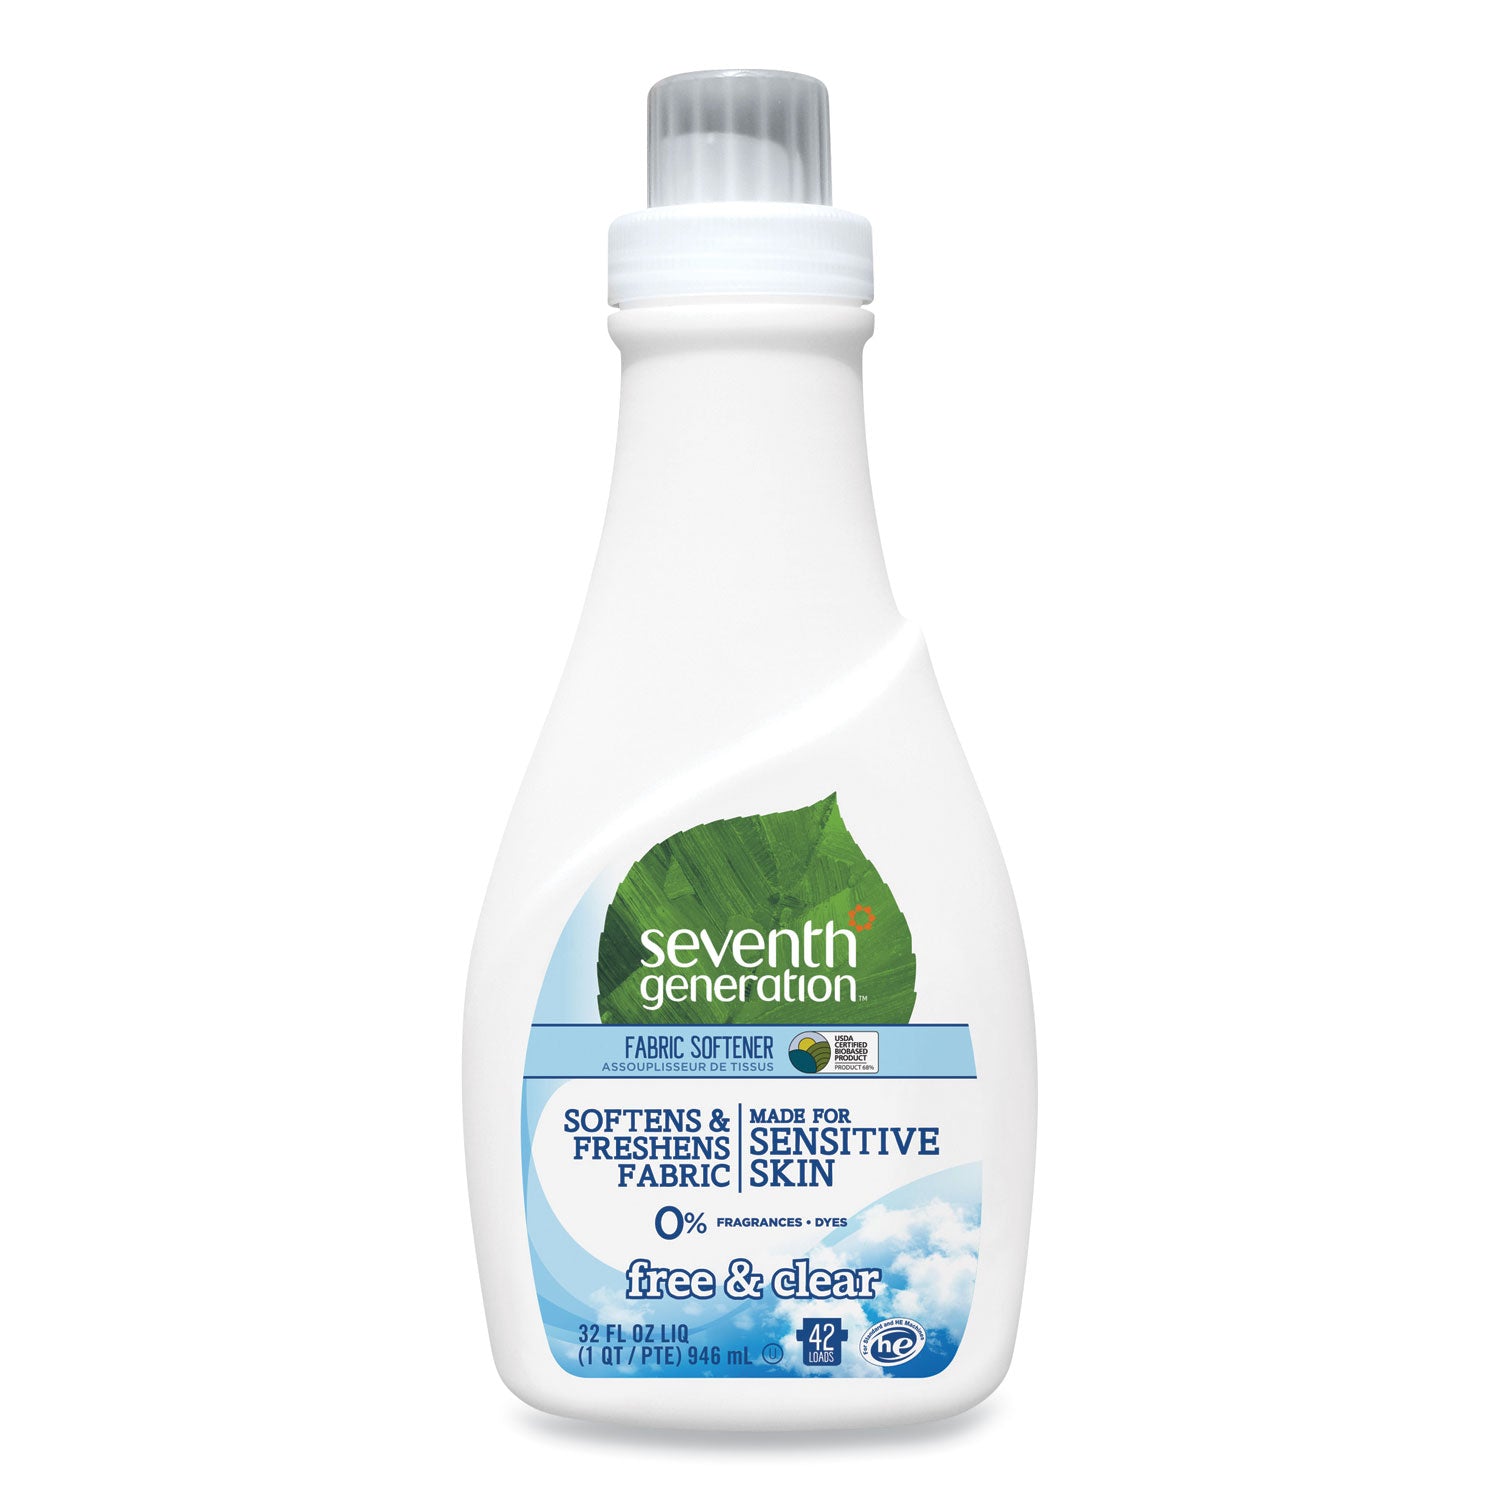 natural-liquid-fabric-softener-free-and-clear-42-loads-32-oz-bottle-6-carton_sev22833 - 1